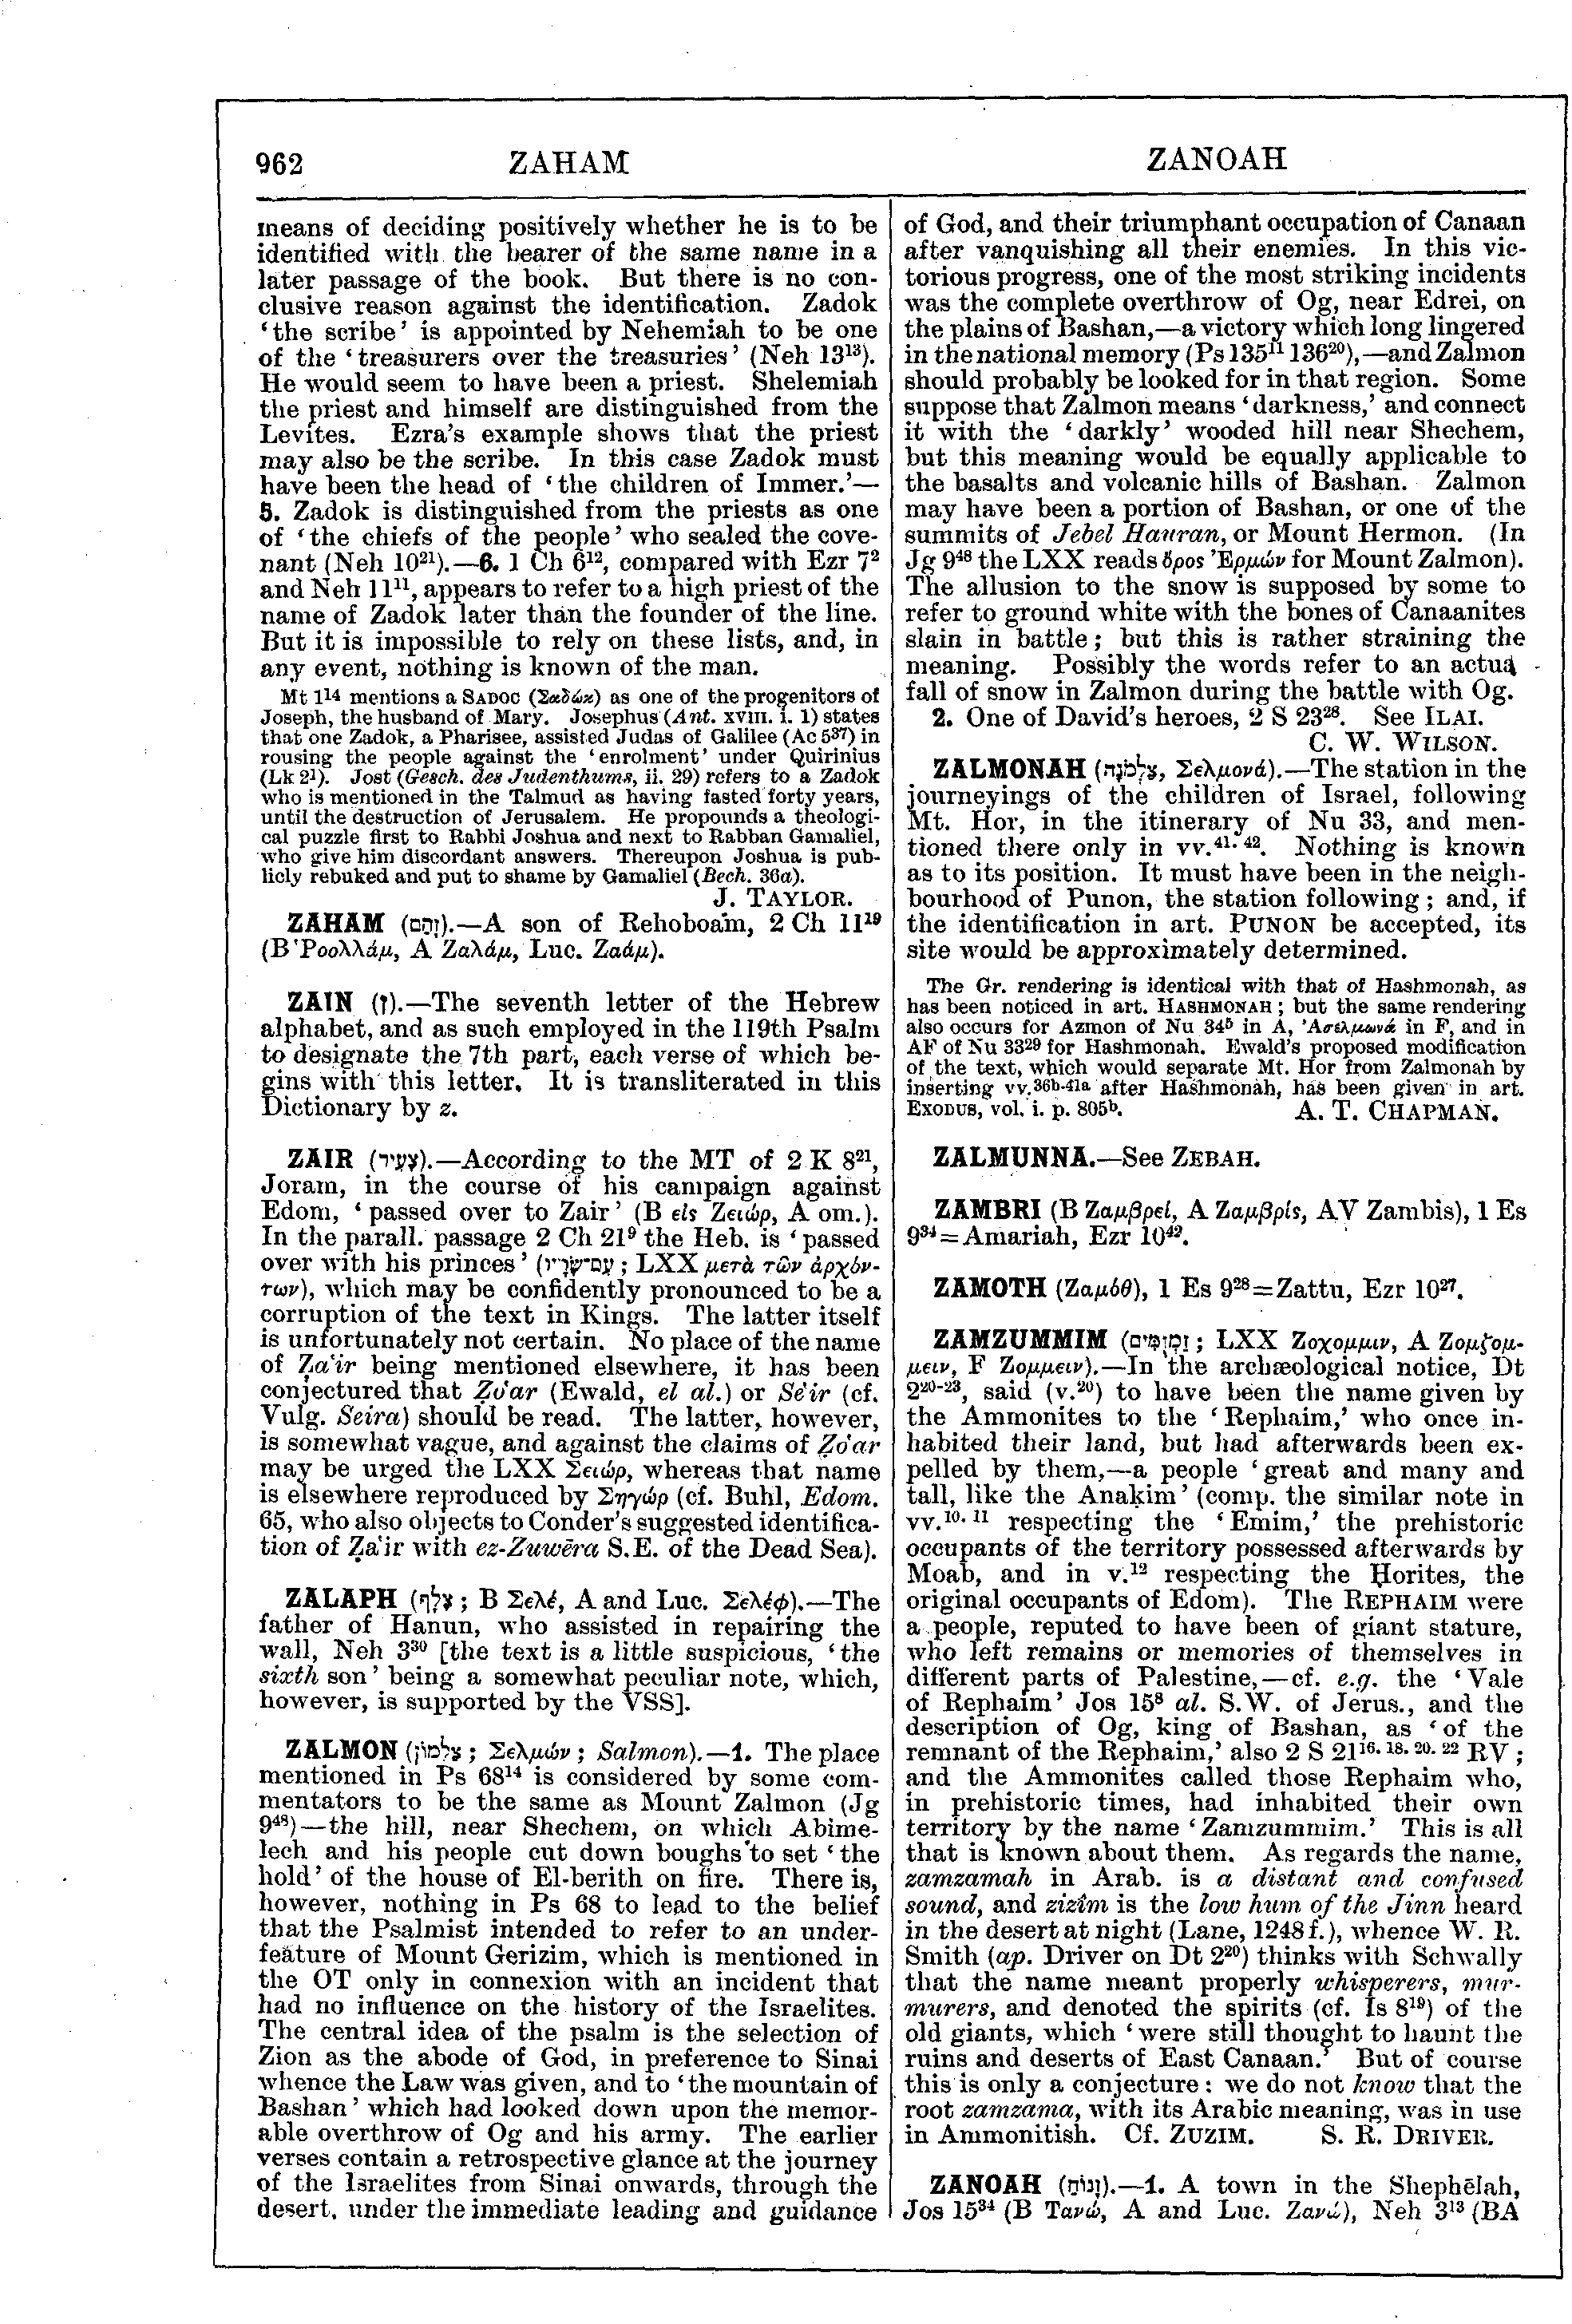 Image of page 962